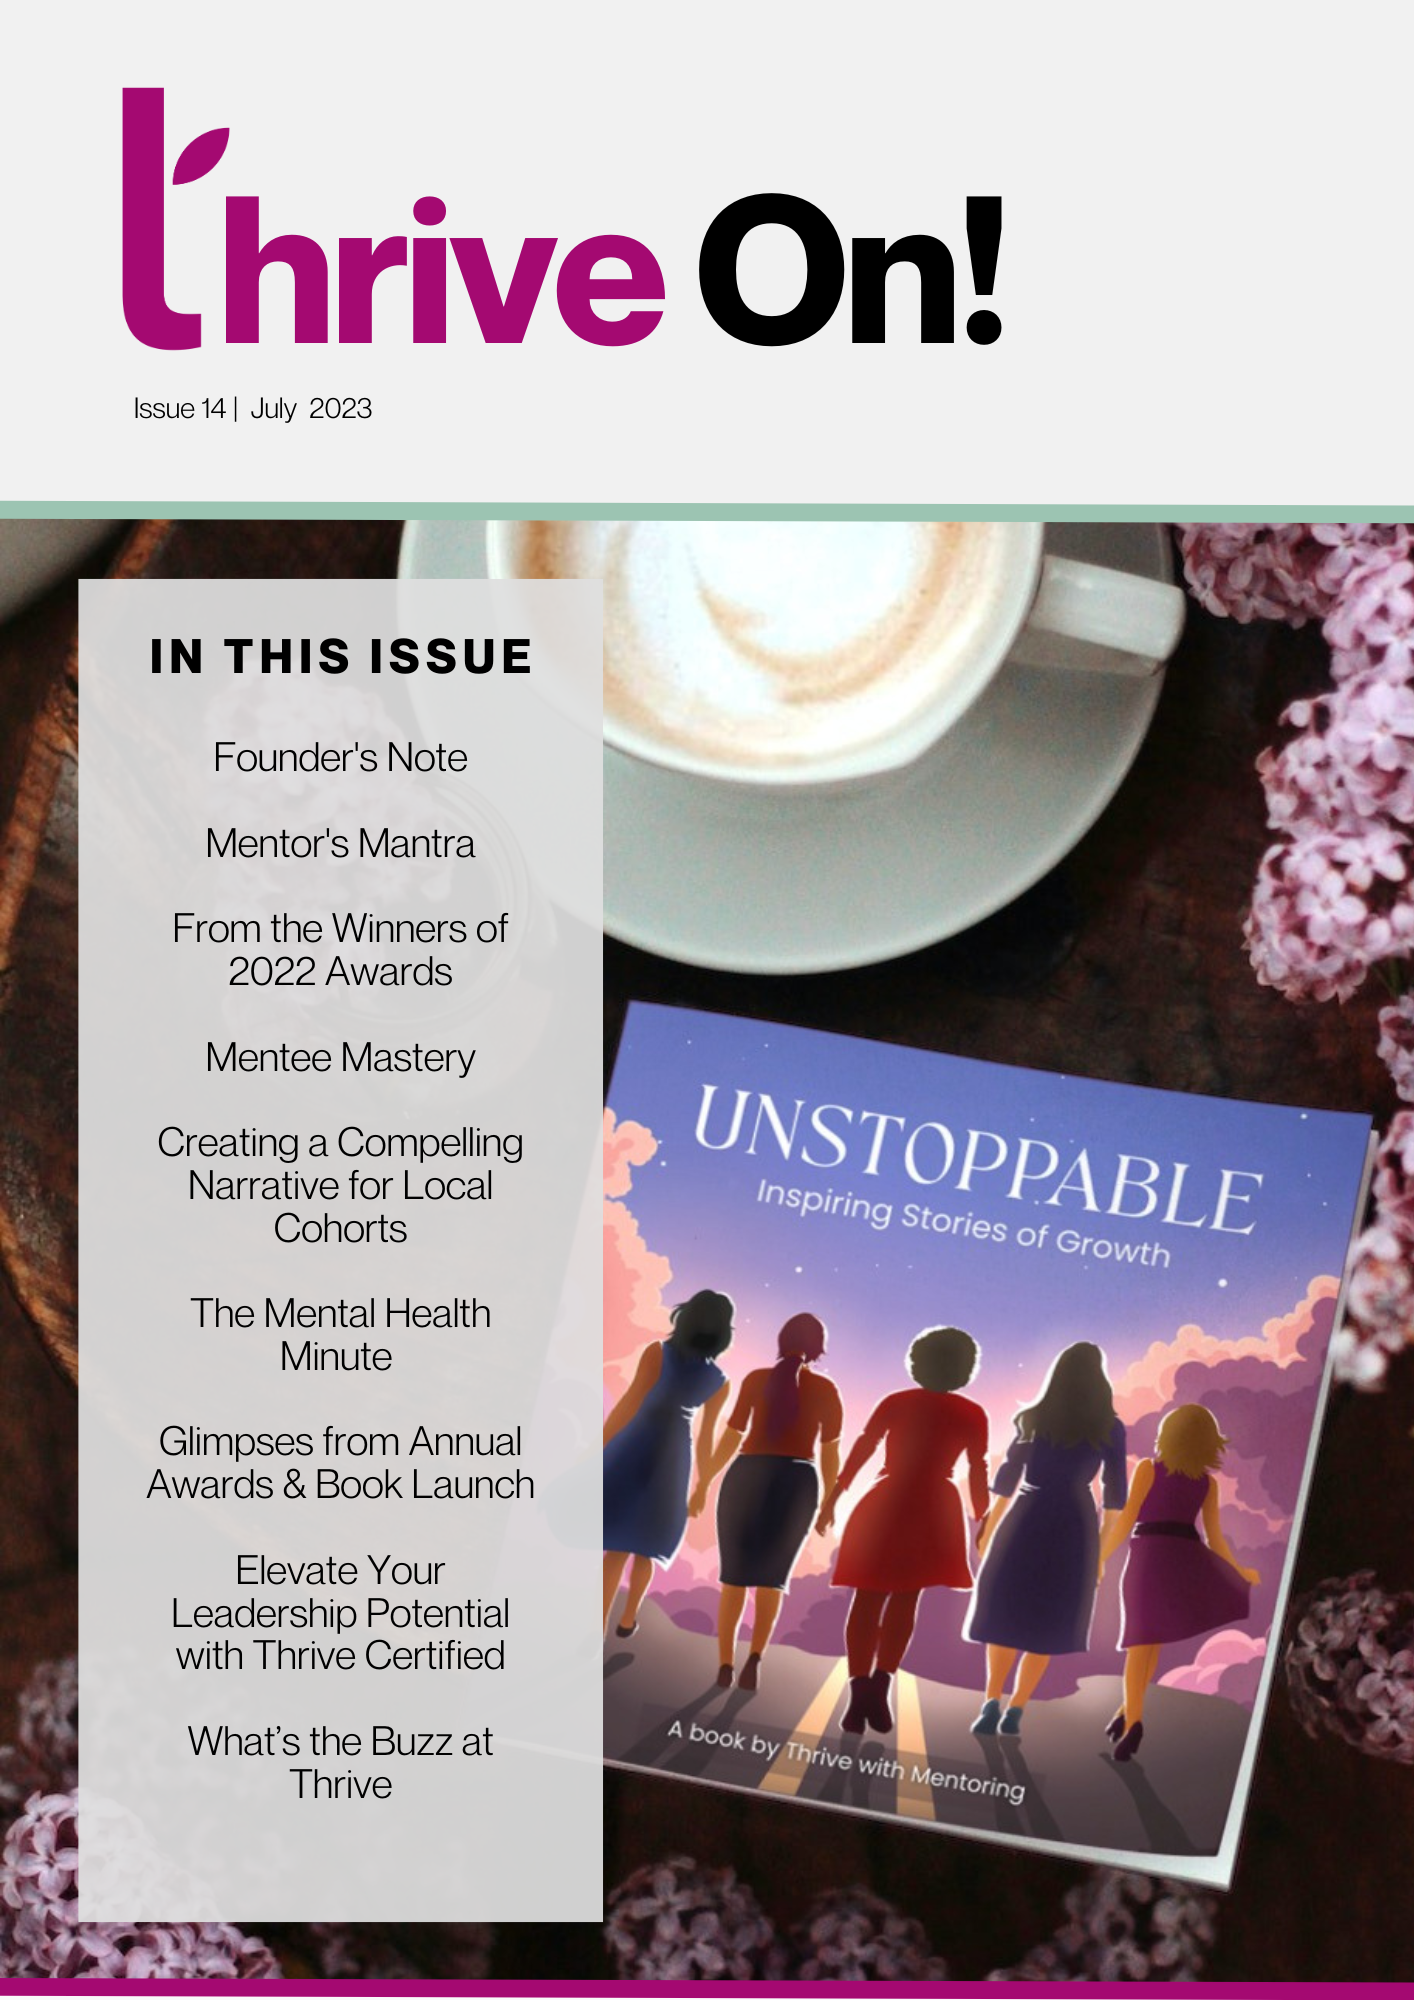 Issue 14 Thrive On! July 2023 Issue.png